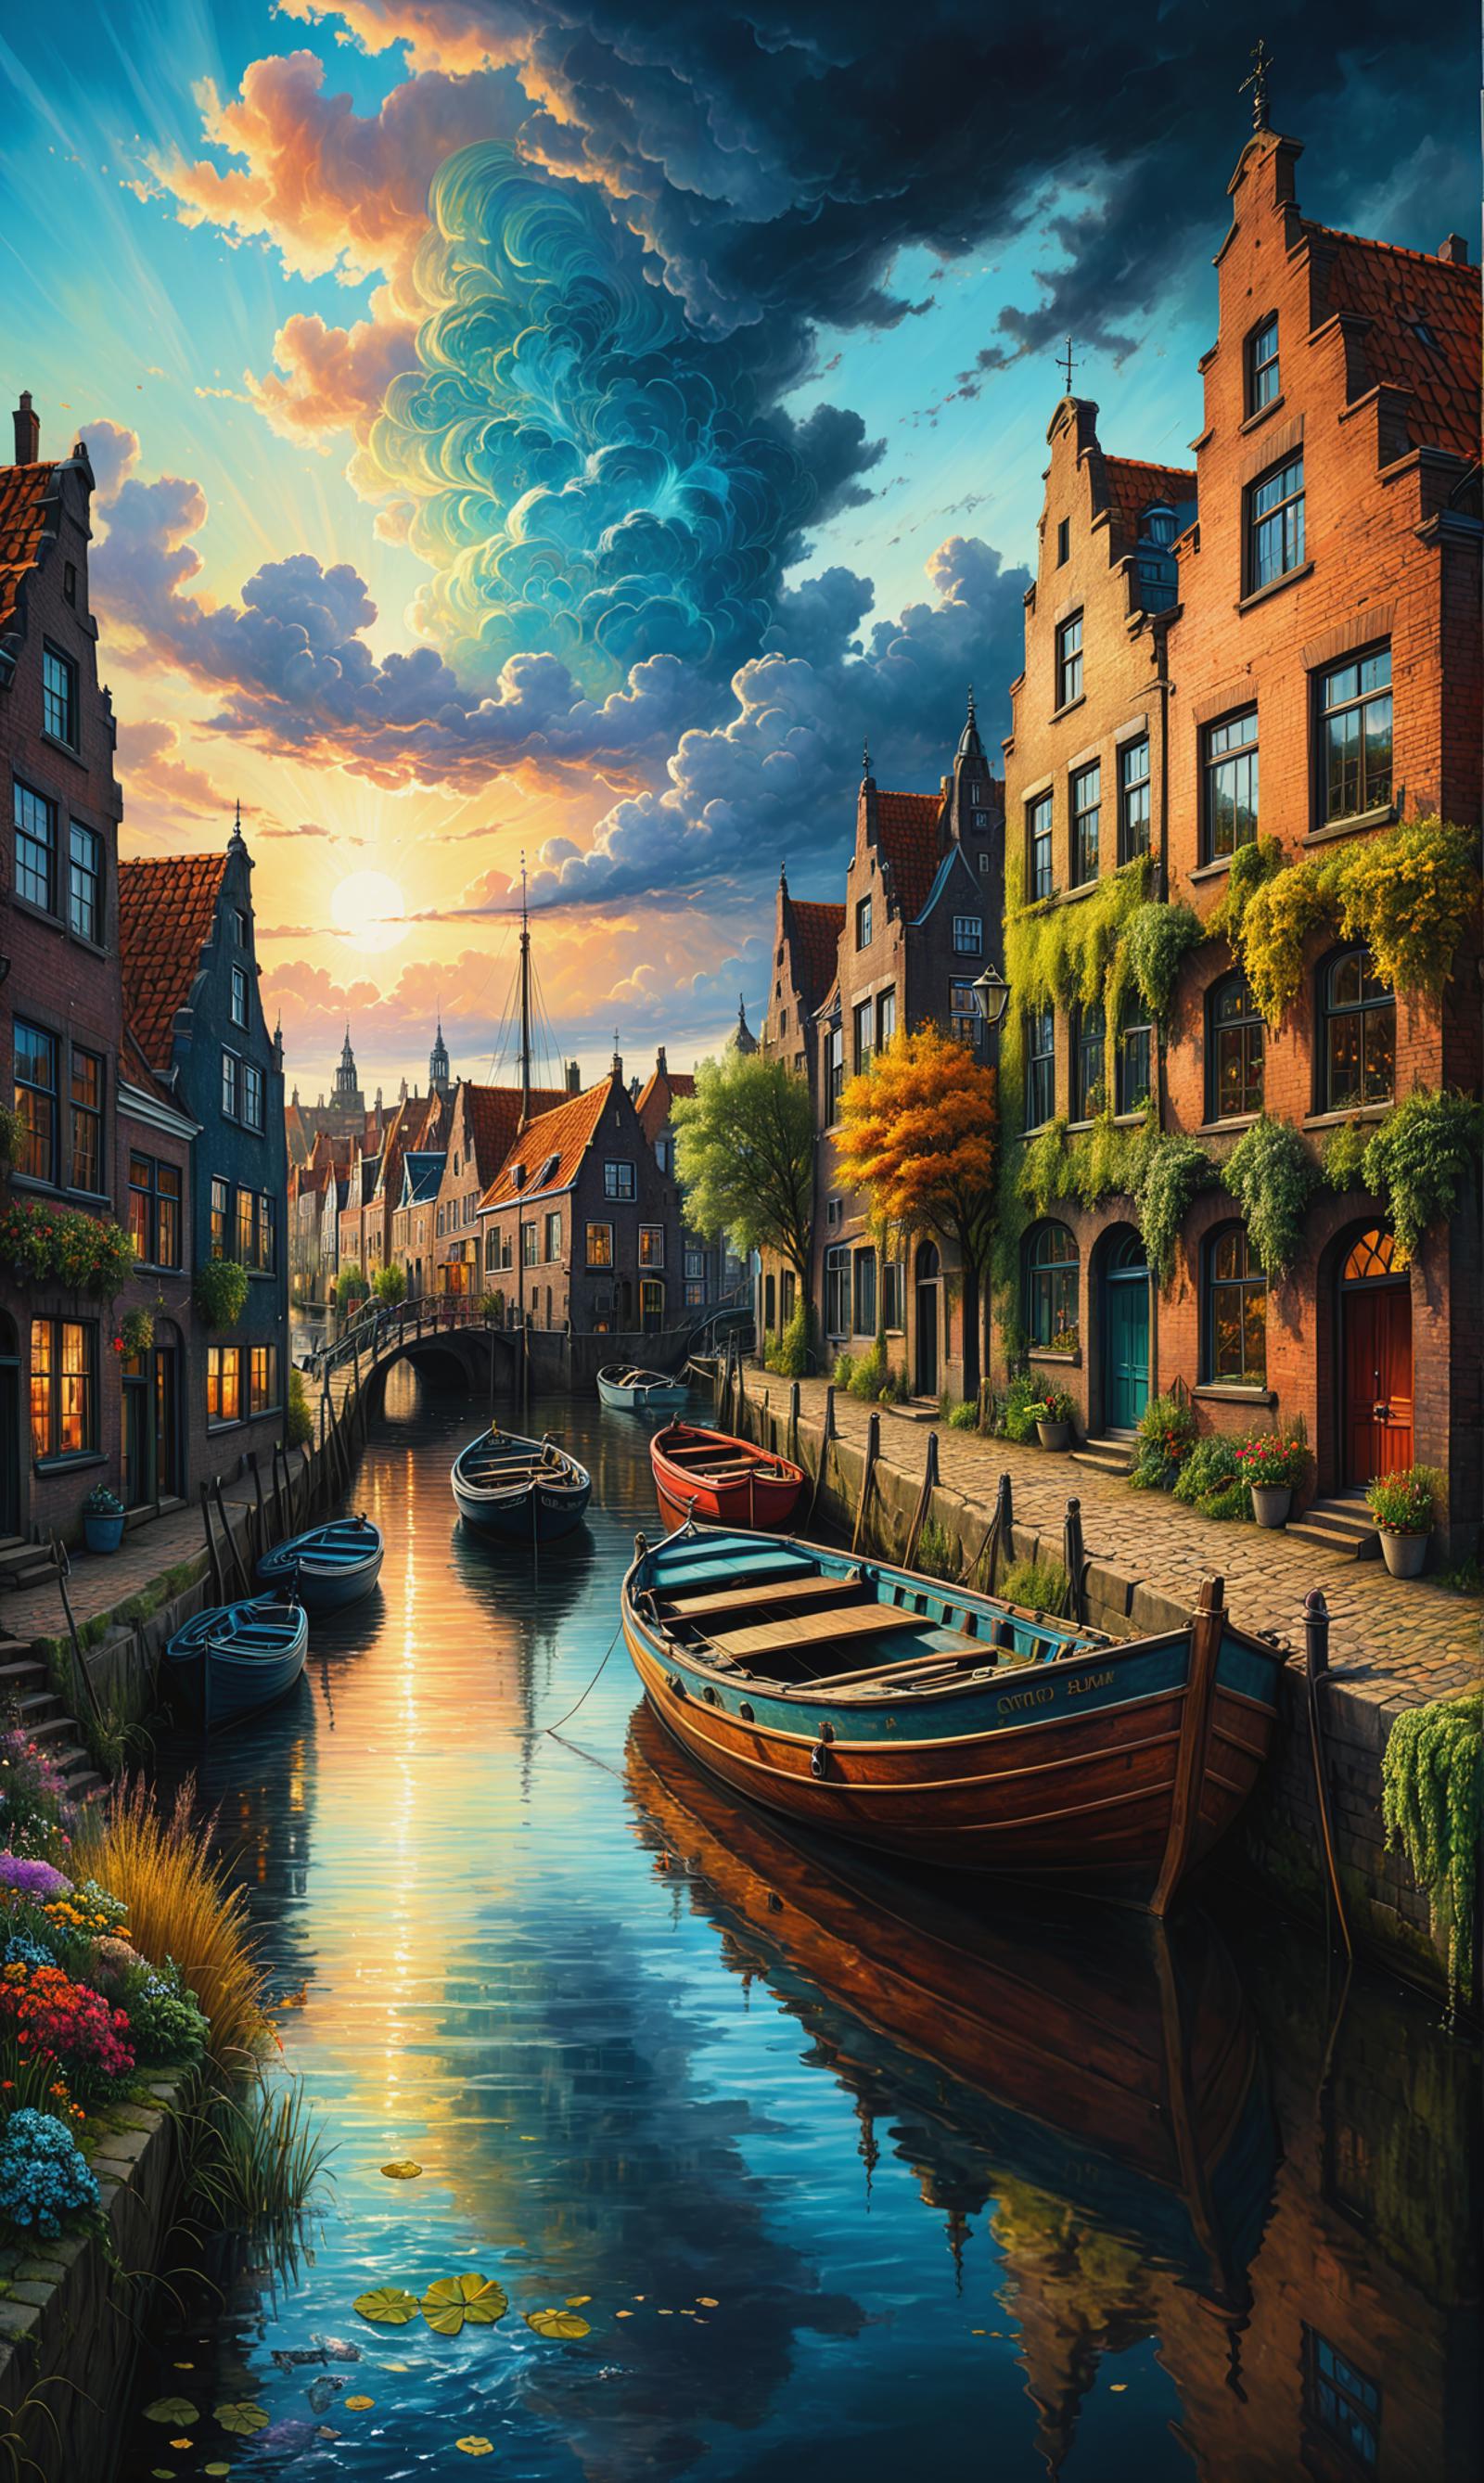 Artistic Painting of a European River Town with Boats in the Water